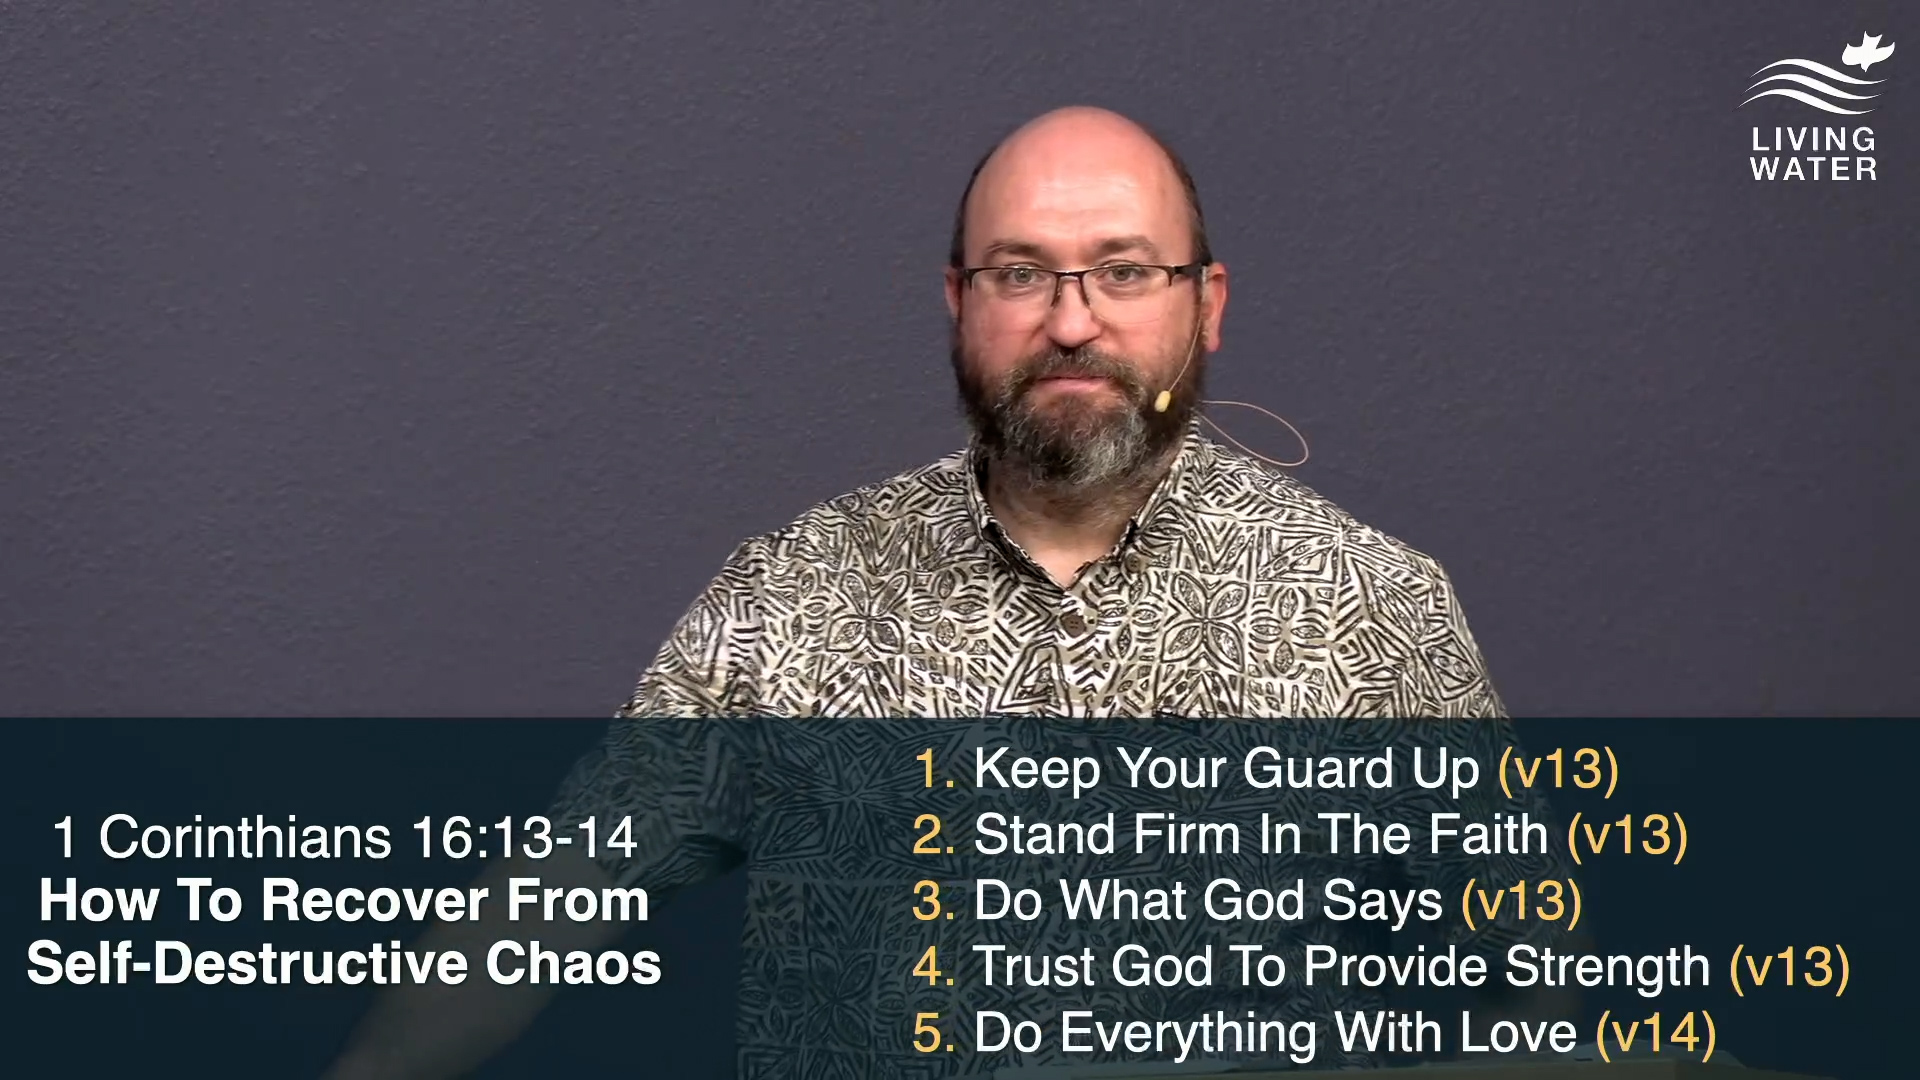 Pastor Jerry Simmons teaching 1 Corinthians 16:13-14, How To Recover From Self-Destructive Chaos